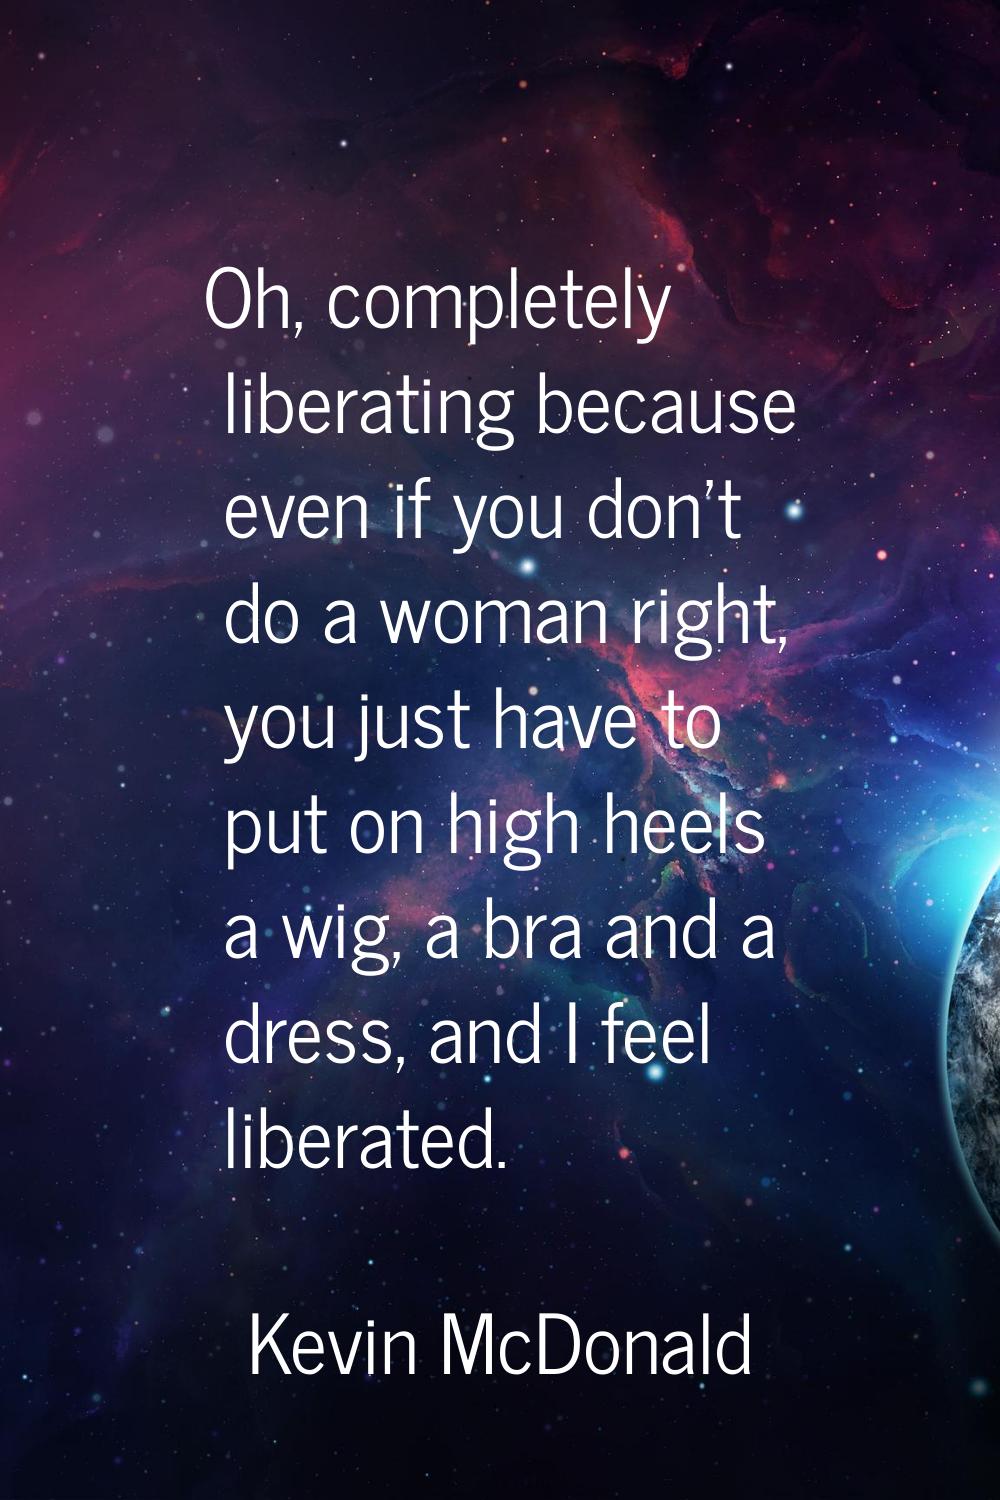 Oh, completely liberating because even if you don't do a woman right, you just have to put on high 